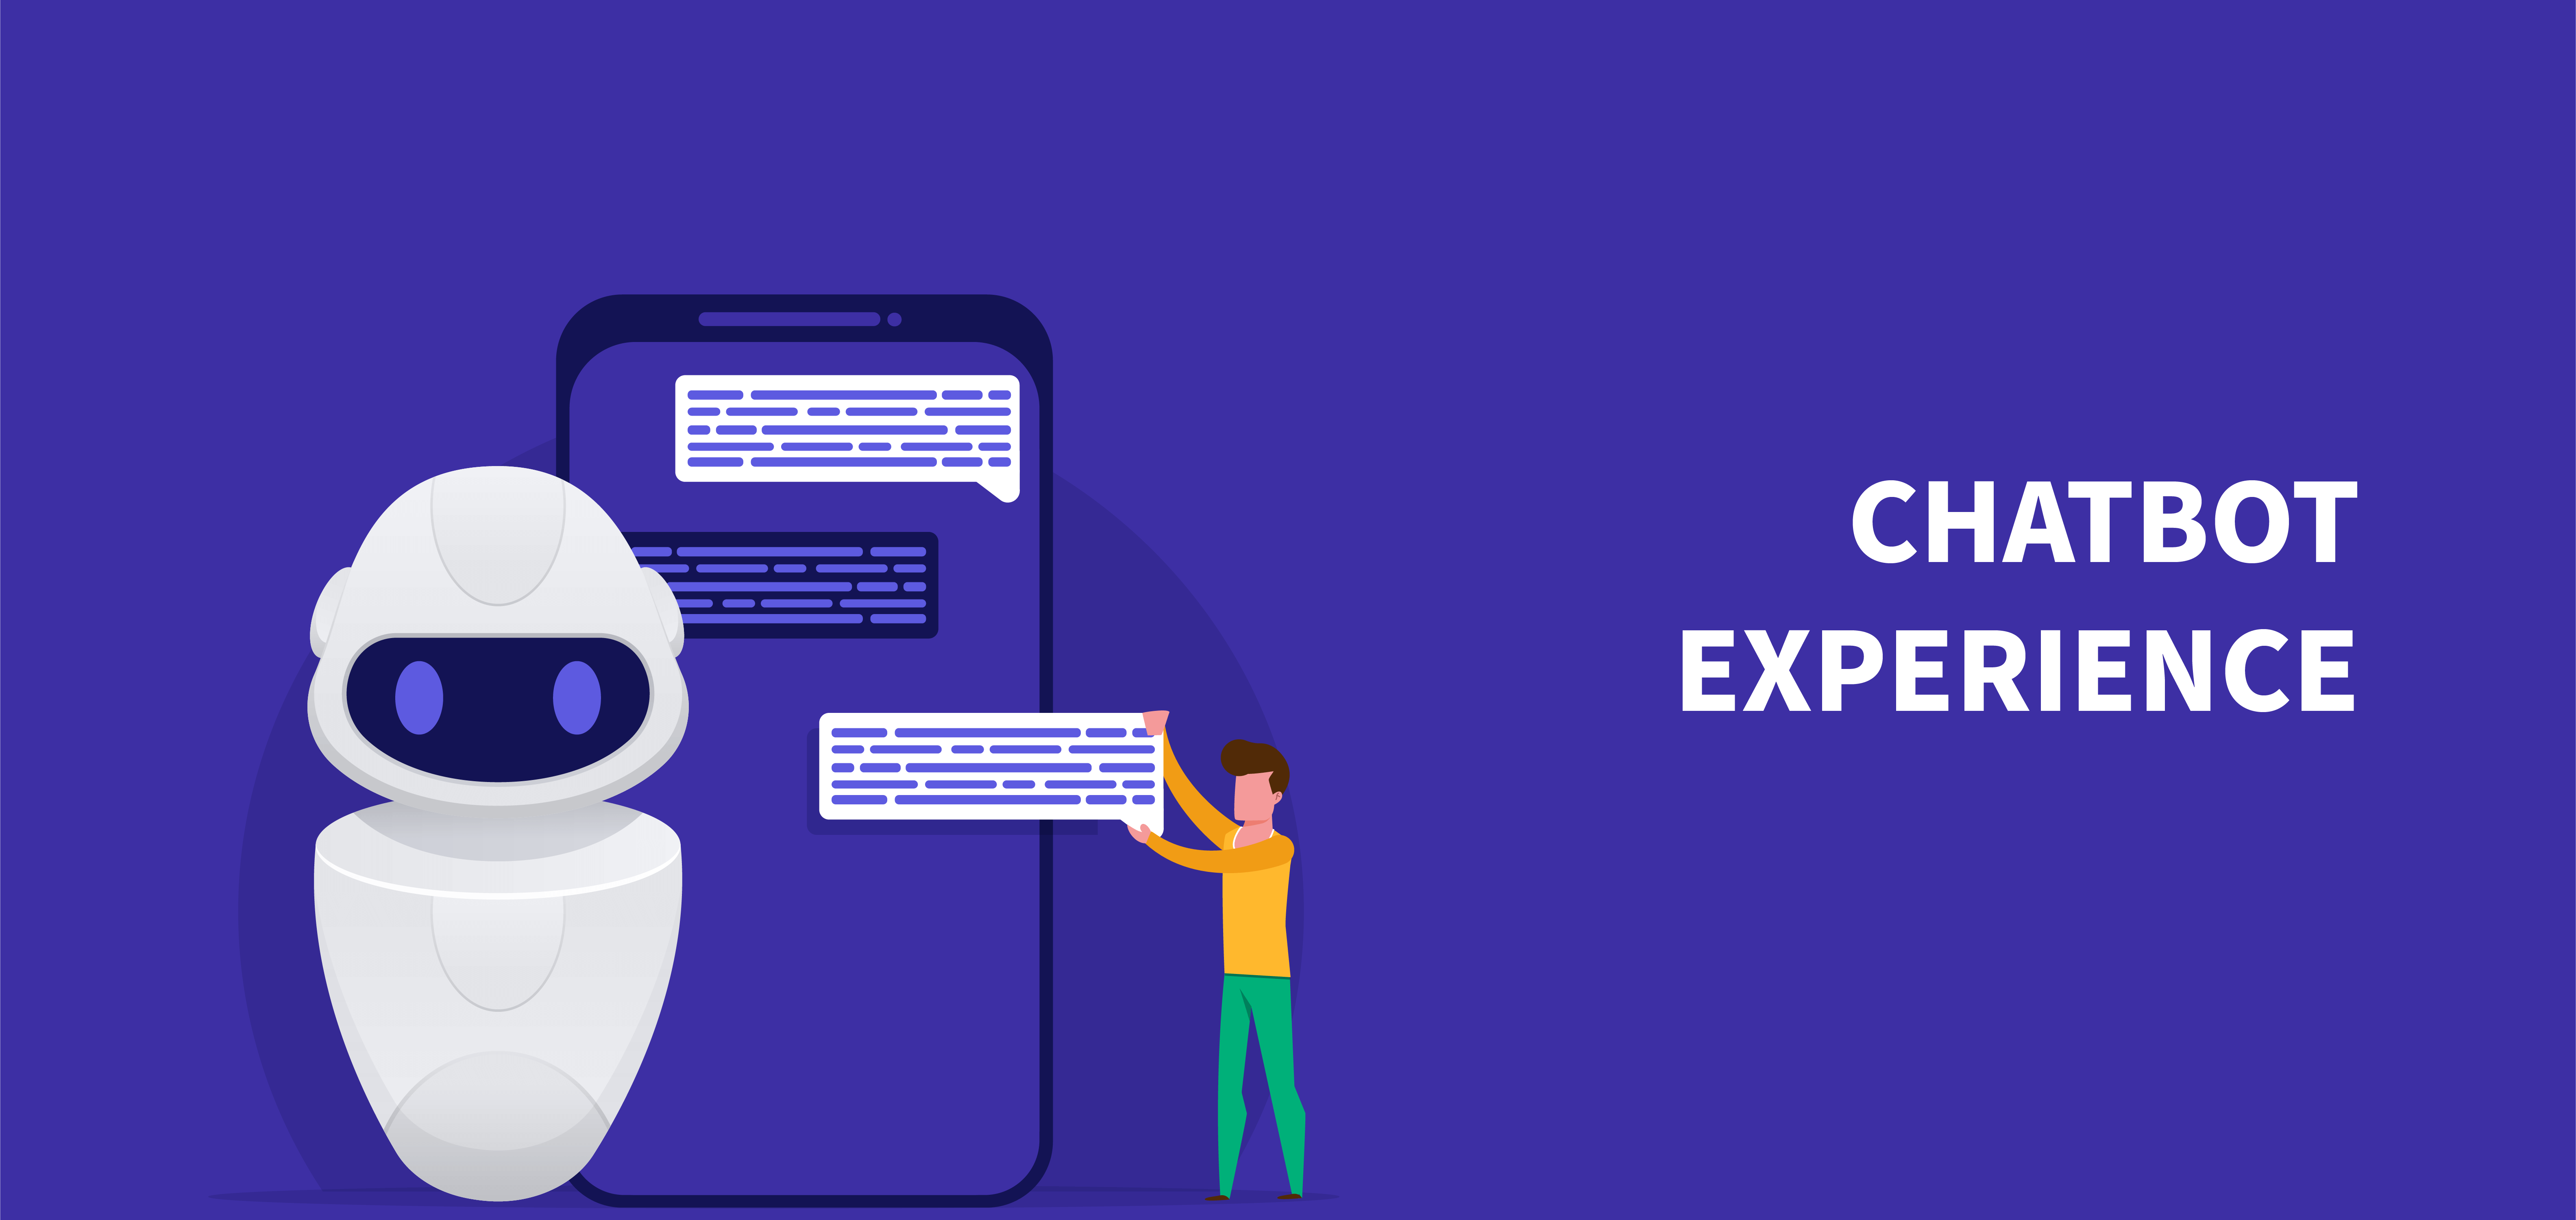 Chatbot User Experience | WebEngage